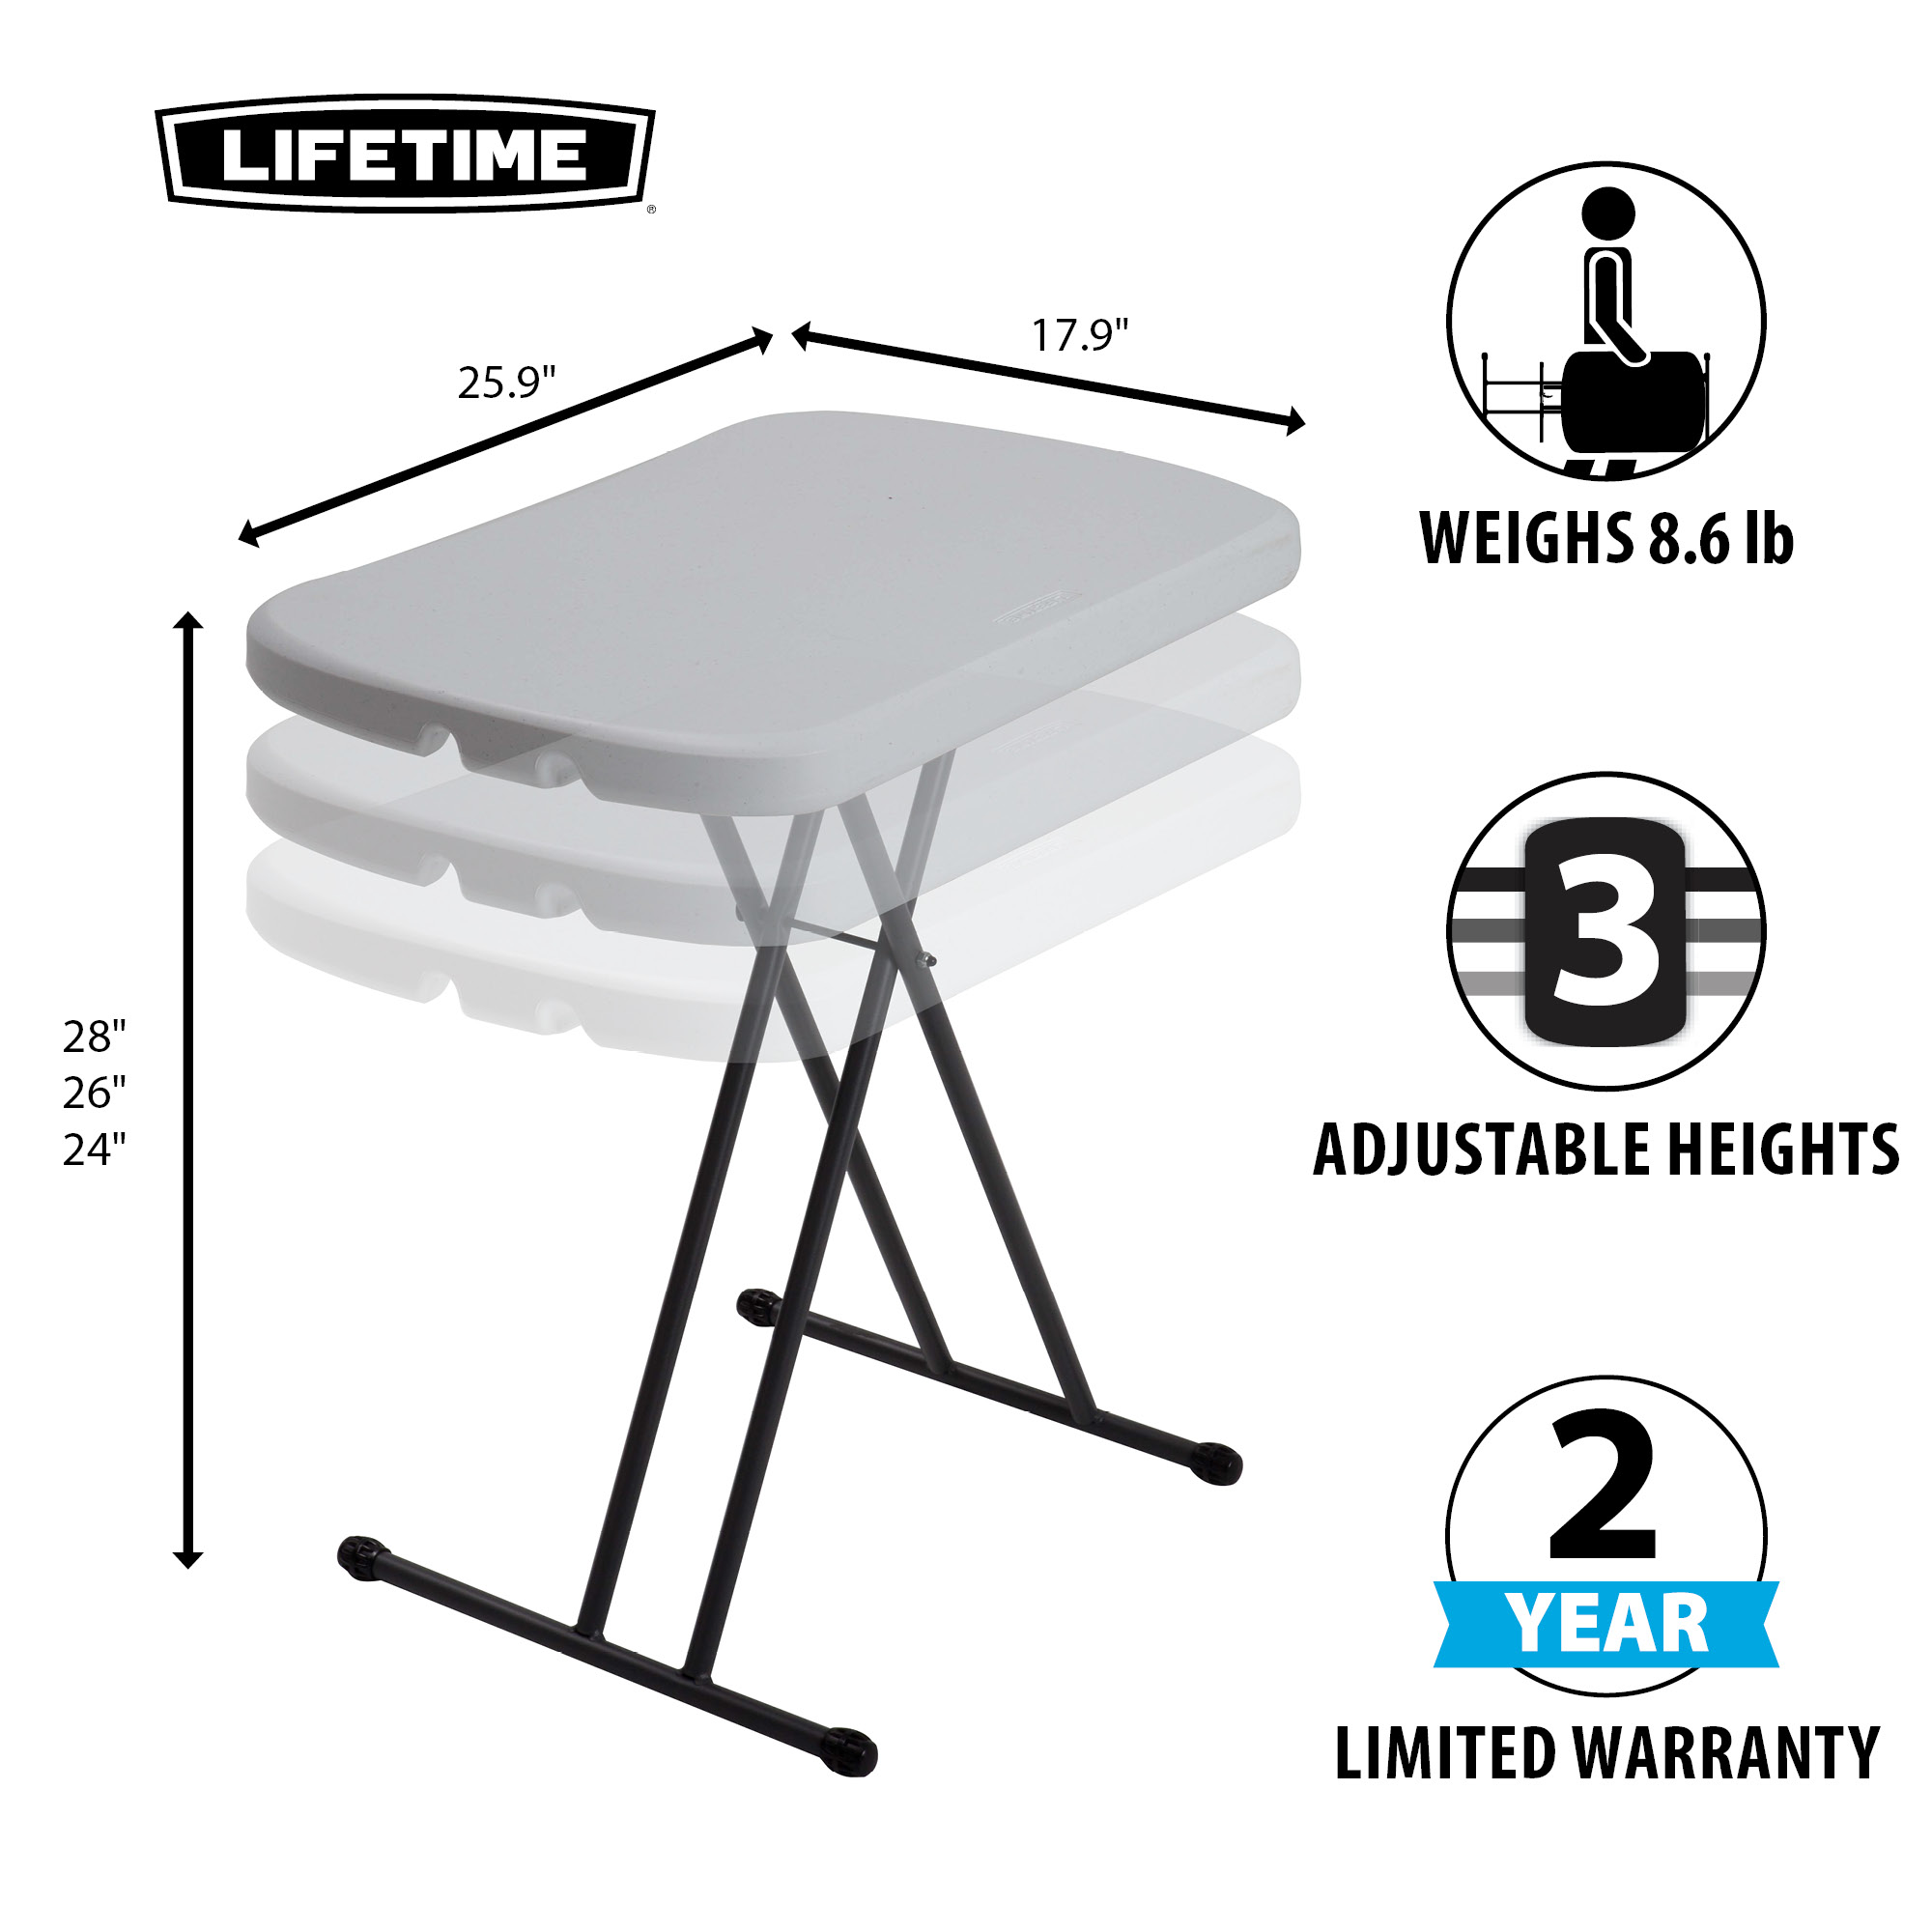 Lifetime 26 inch Rectangle Personal Table, Indoor/Outdoor Light Commercial Grade, White Granite (80251) - image 3 of 23